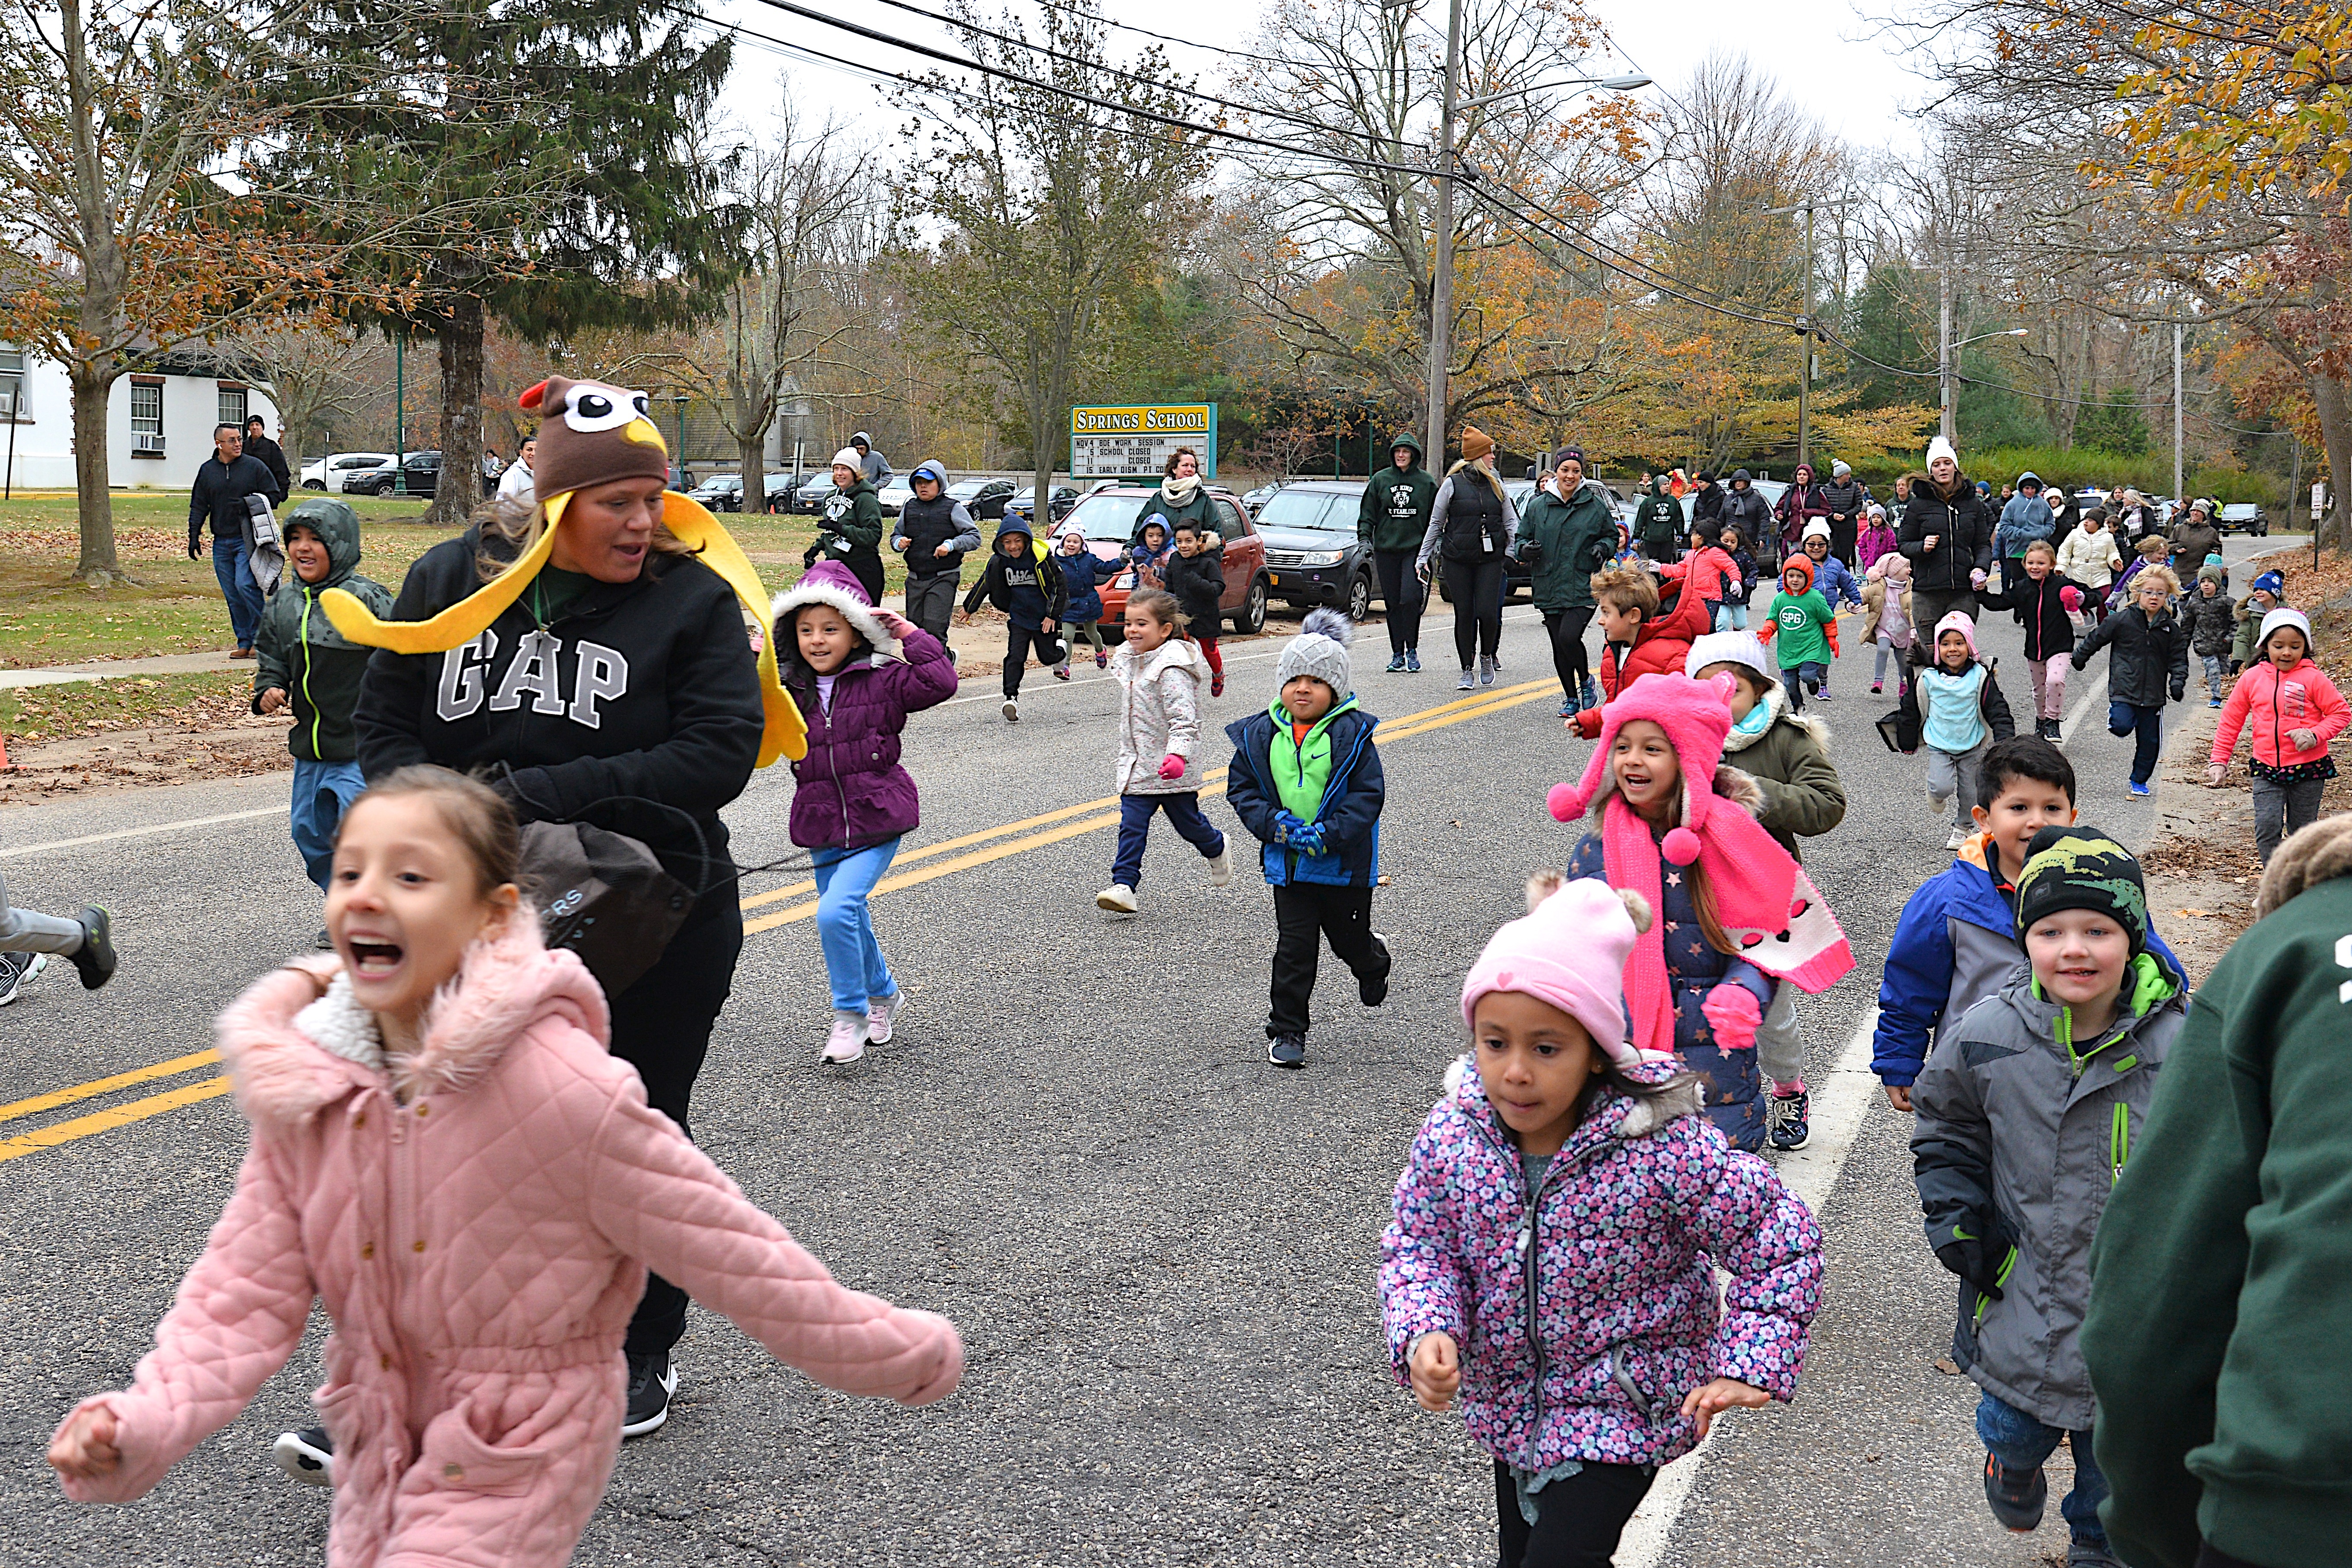 Springs School students and staff bust out the door on Monday morning for the Turkey Trot, to raise money for the school's swim program at the YMCA. KYRIL BROMLEY